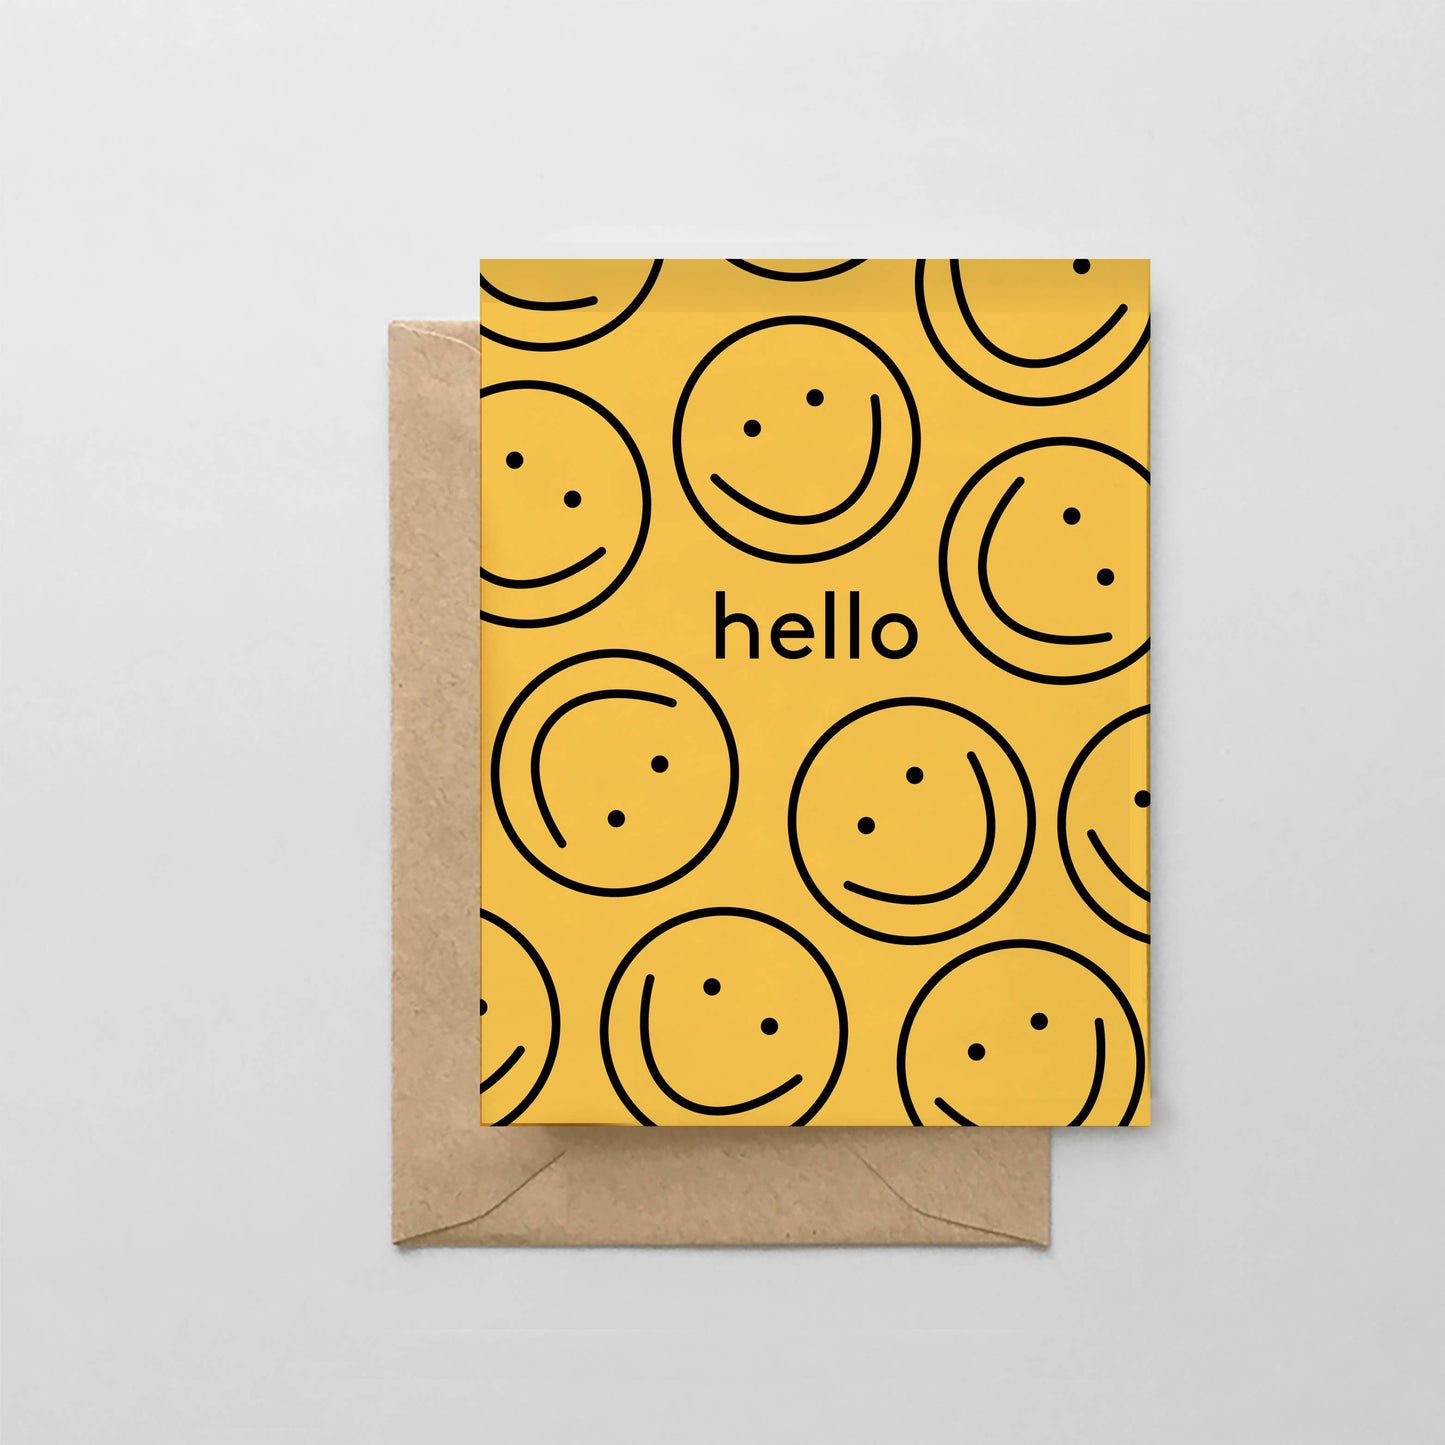 Hello Yellow Smiley Pattern - Greeting Card